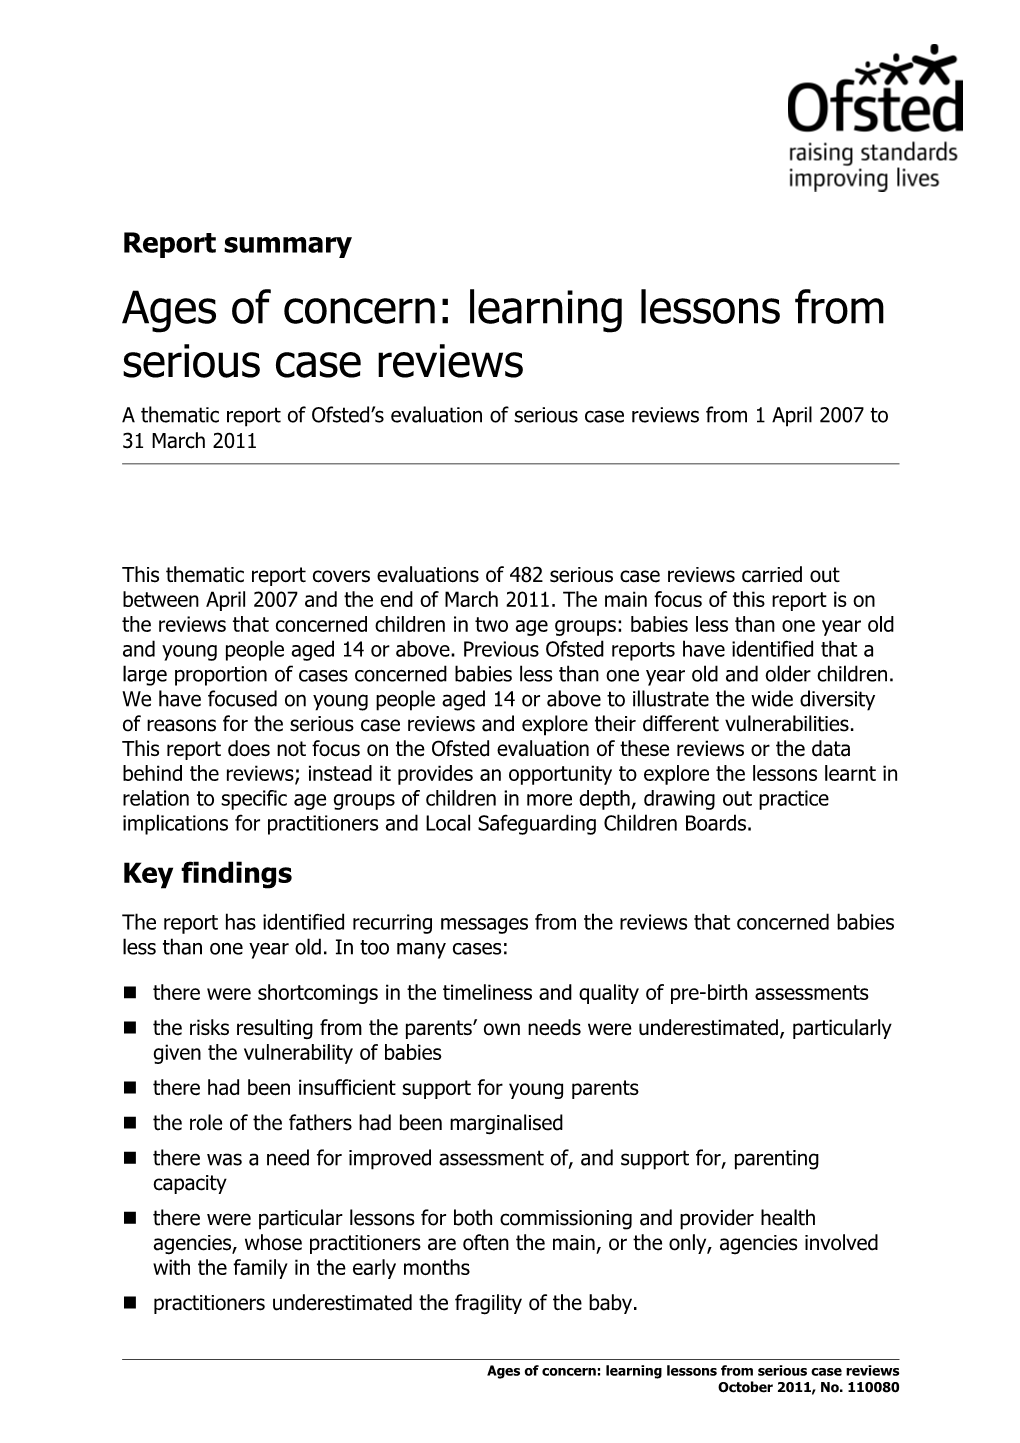 Ages of Concern: Learning Lessons from Serious Case Reviews